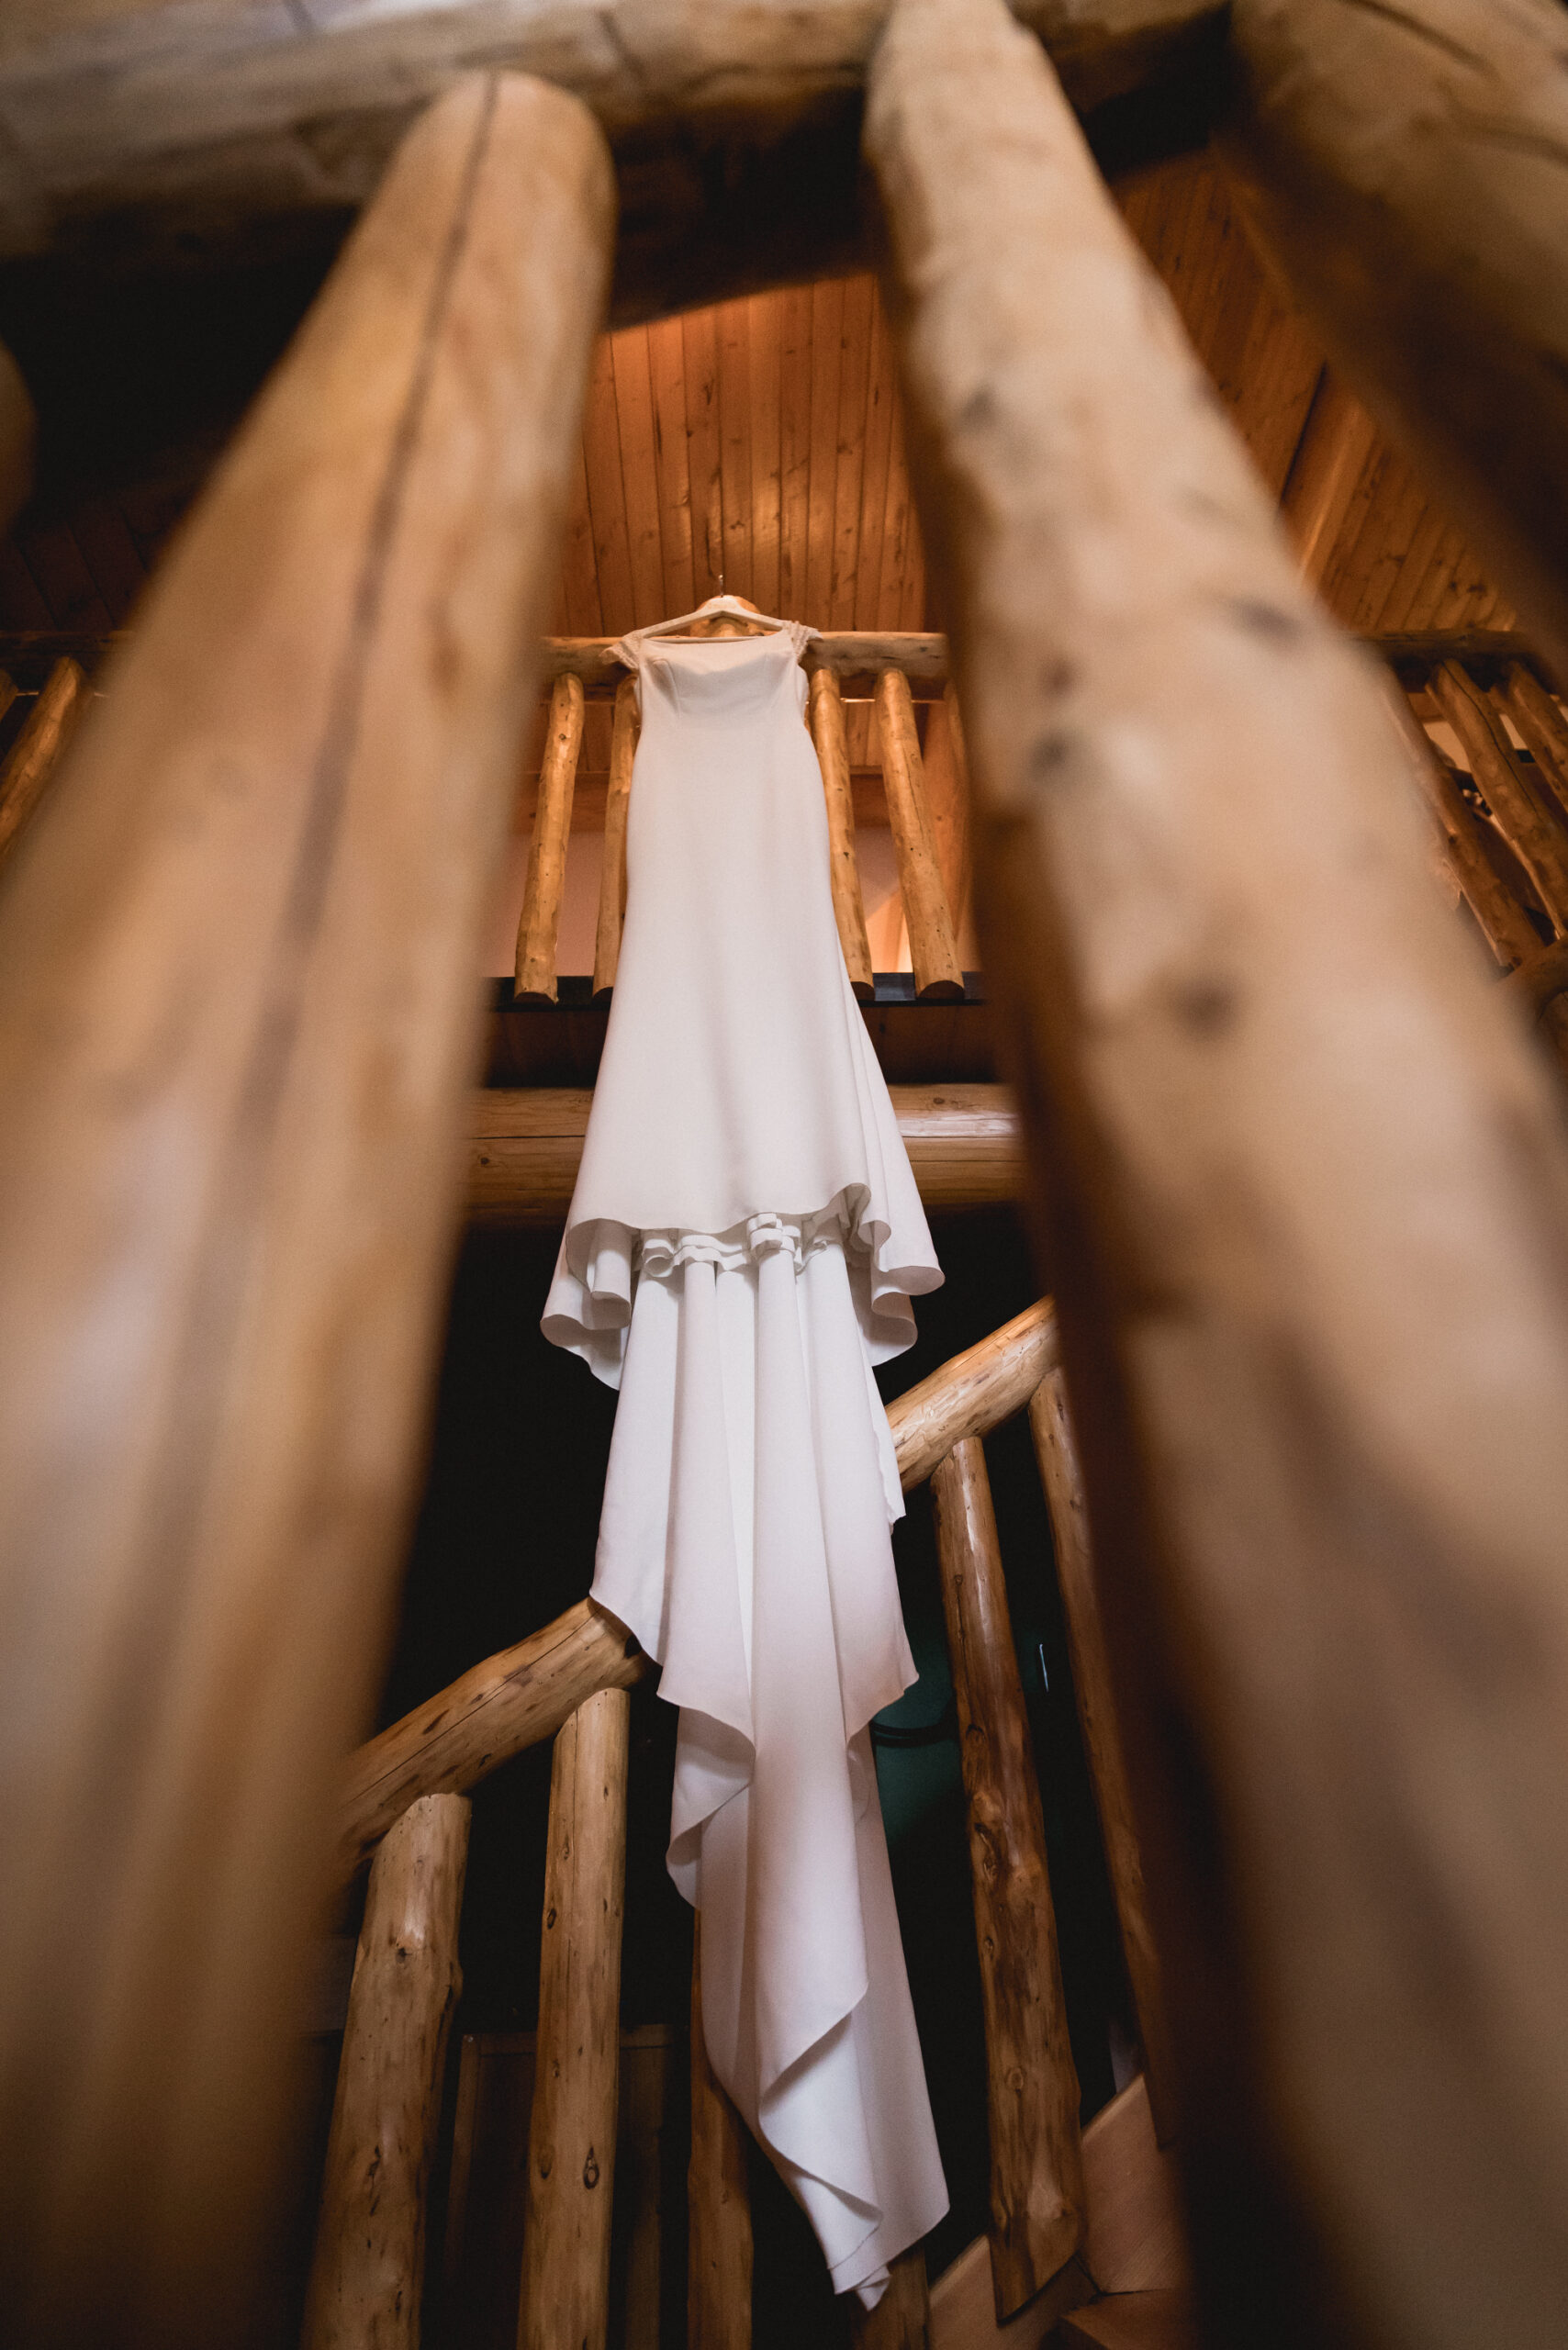 Classic wedding dress hanging down between two beams in a luxury log cabin